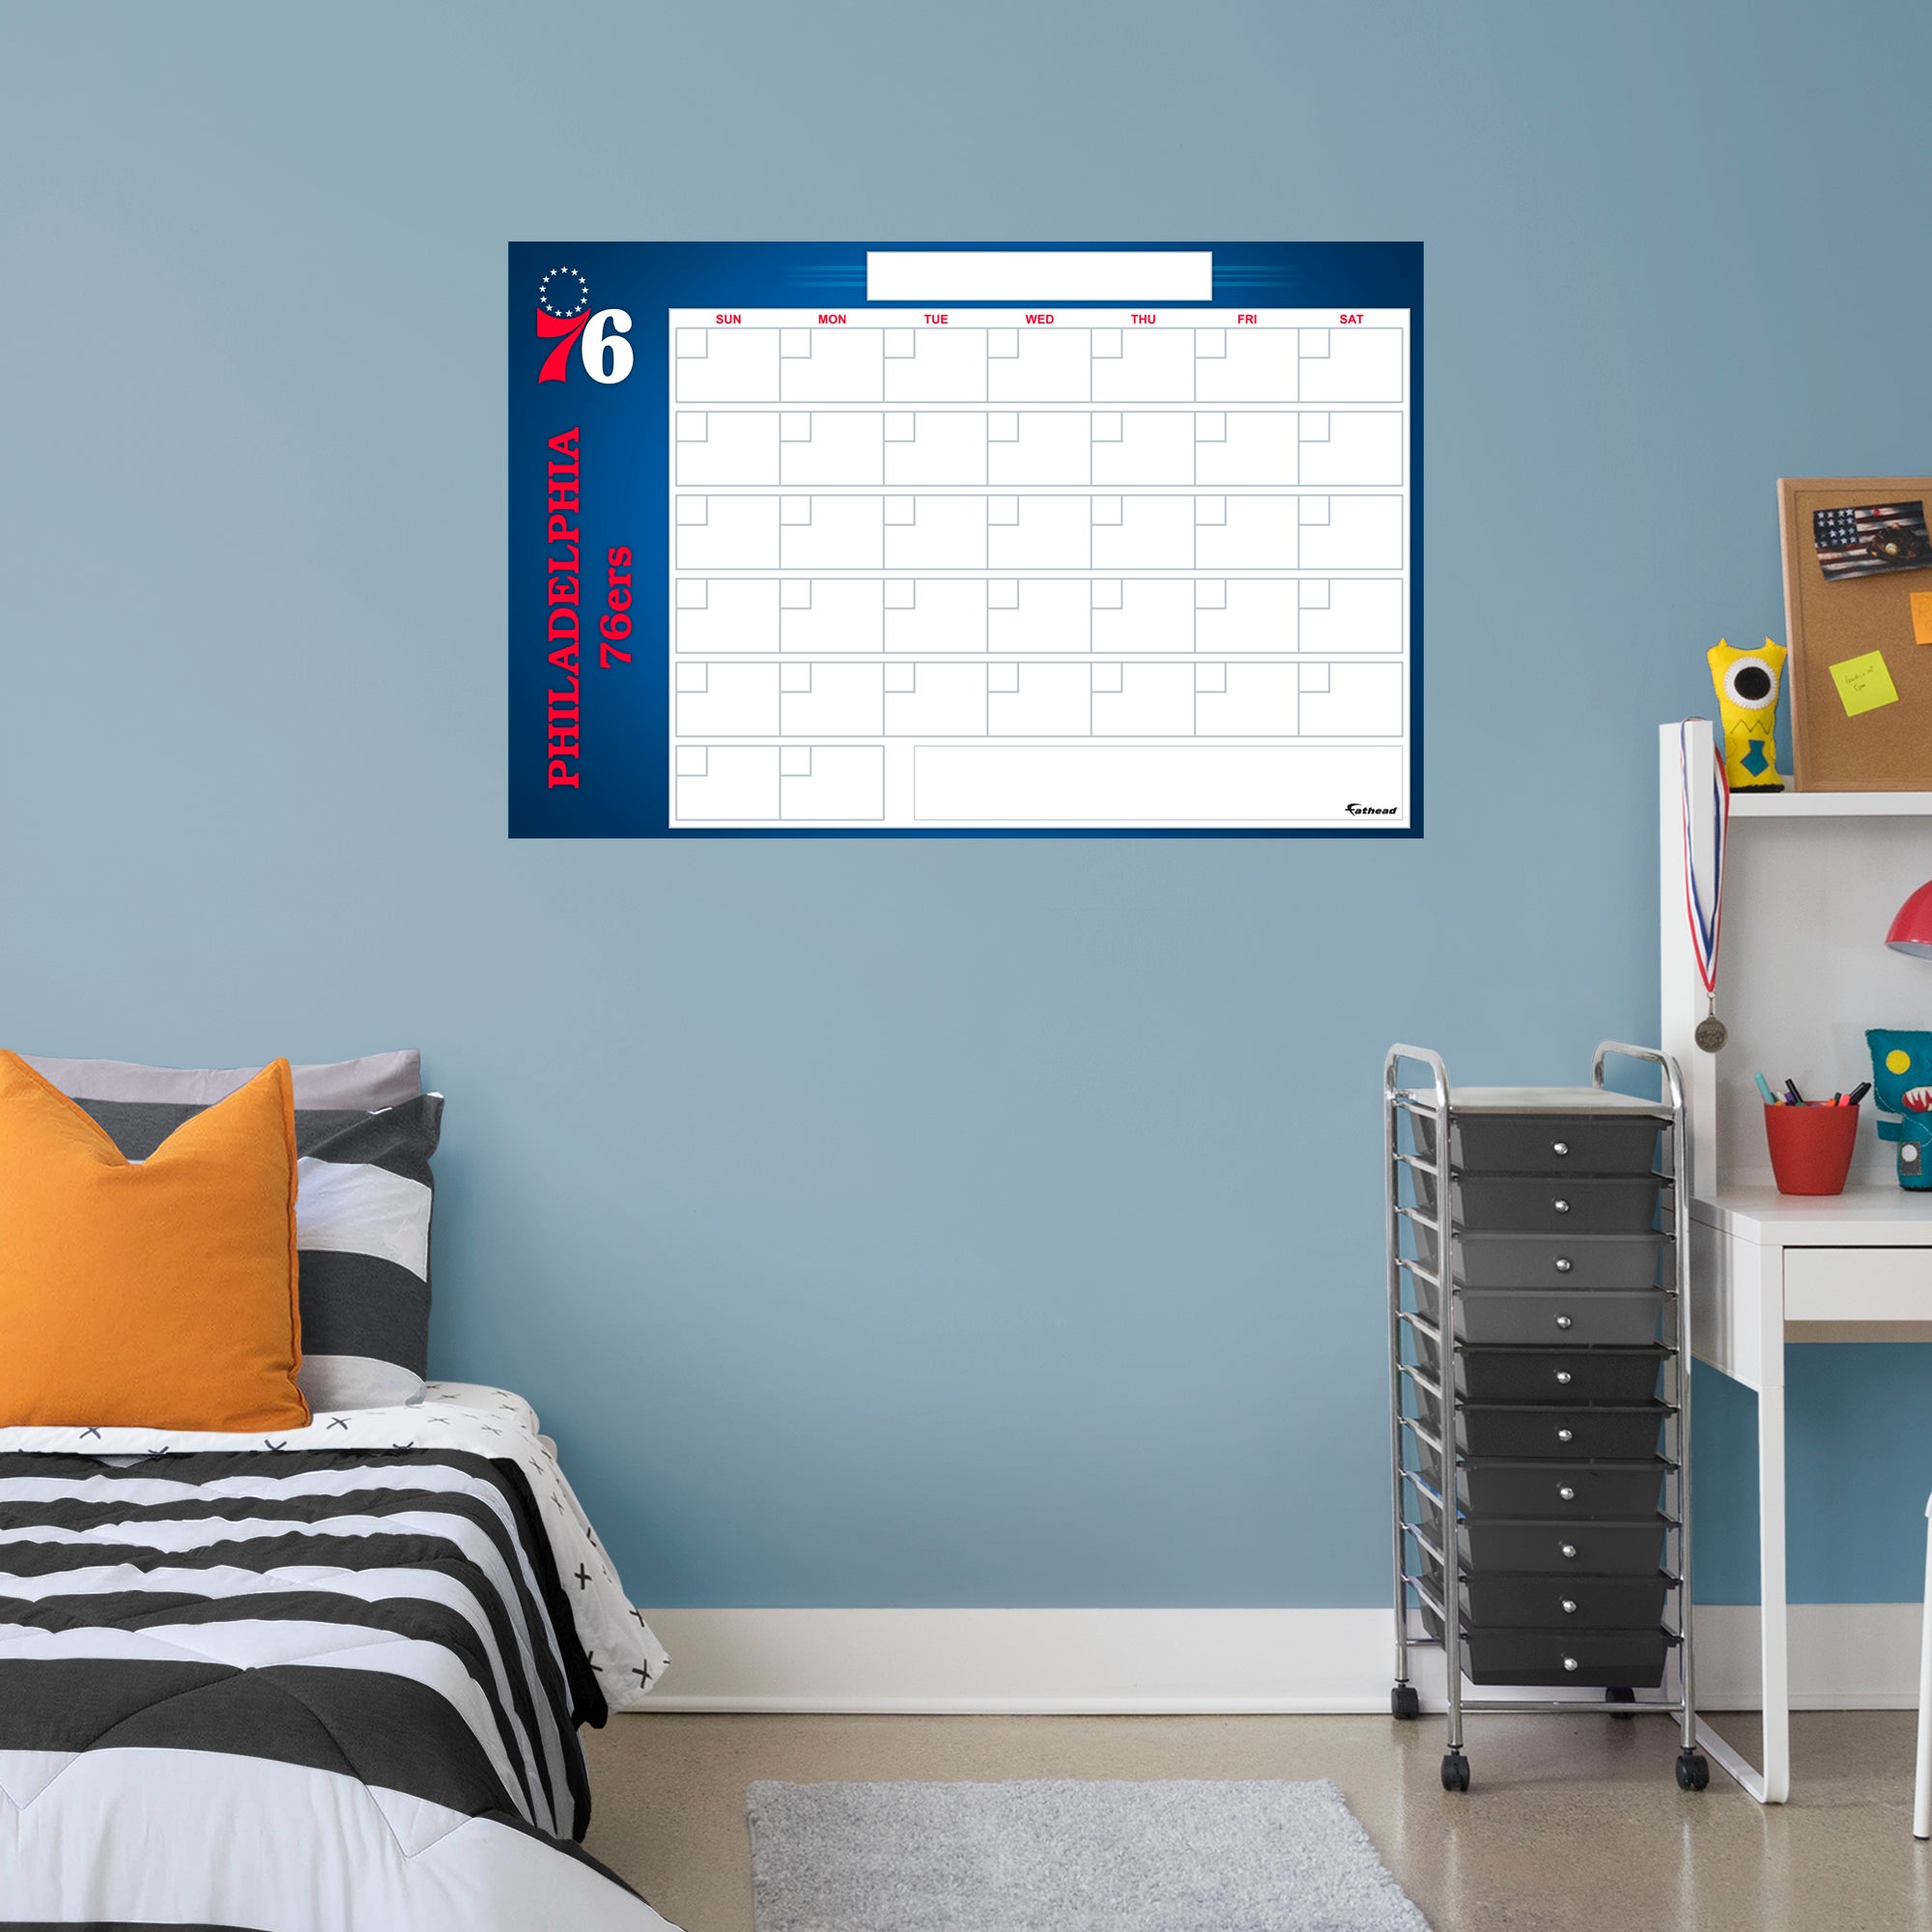 Philadelphia 76ers Dry Erase Calendar - Officially Licensed NBA Removable Wall Decal Giant Decal (34"W x 52"H) by Fathead | Viny